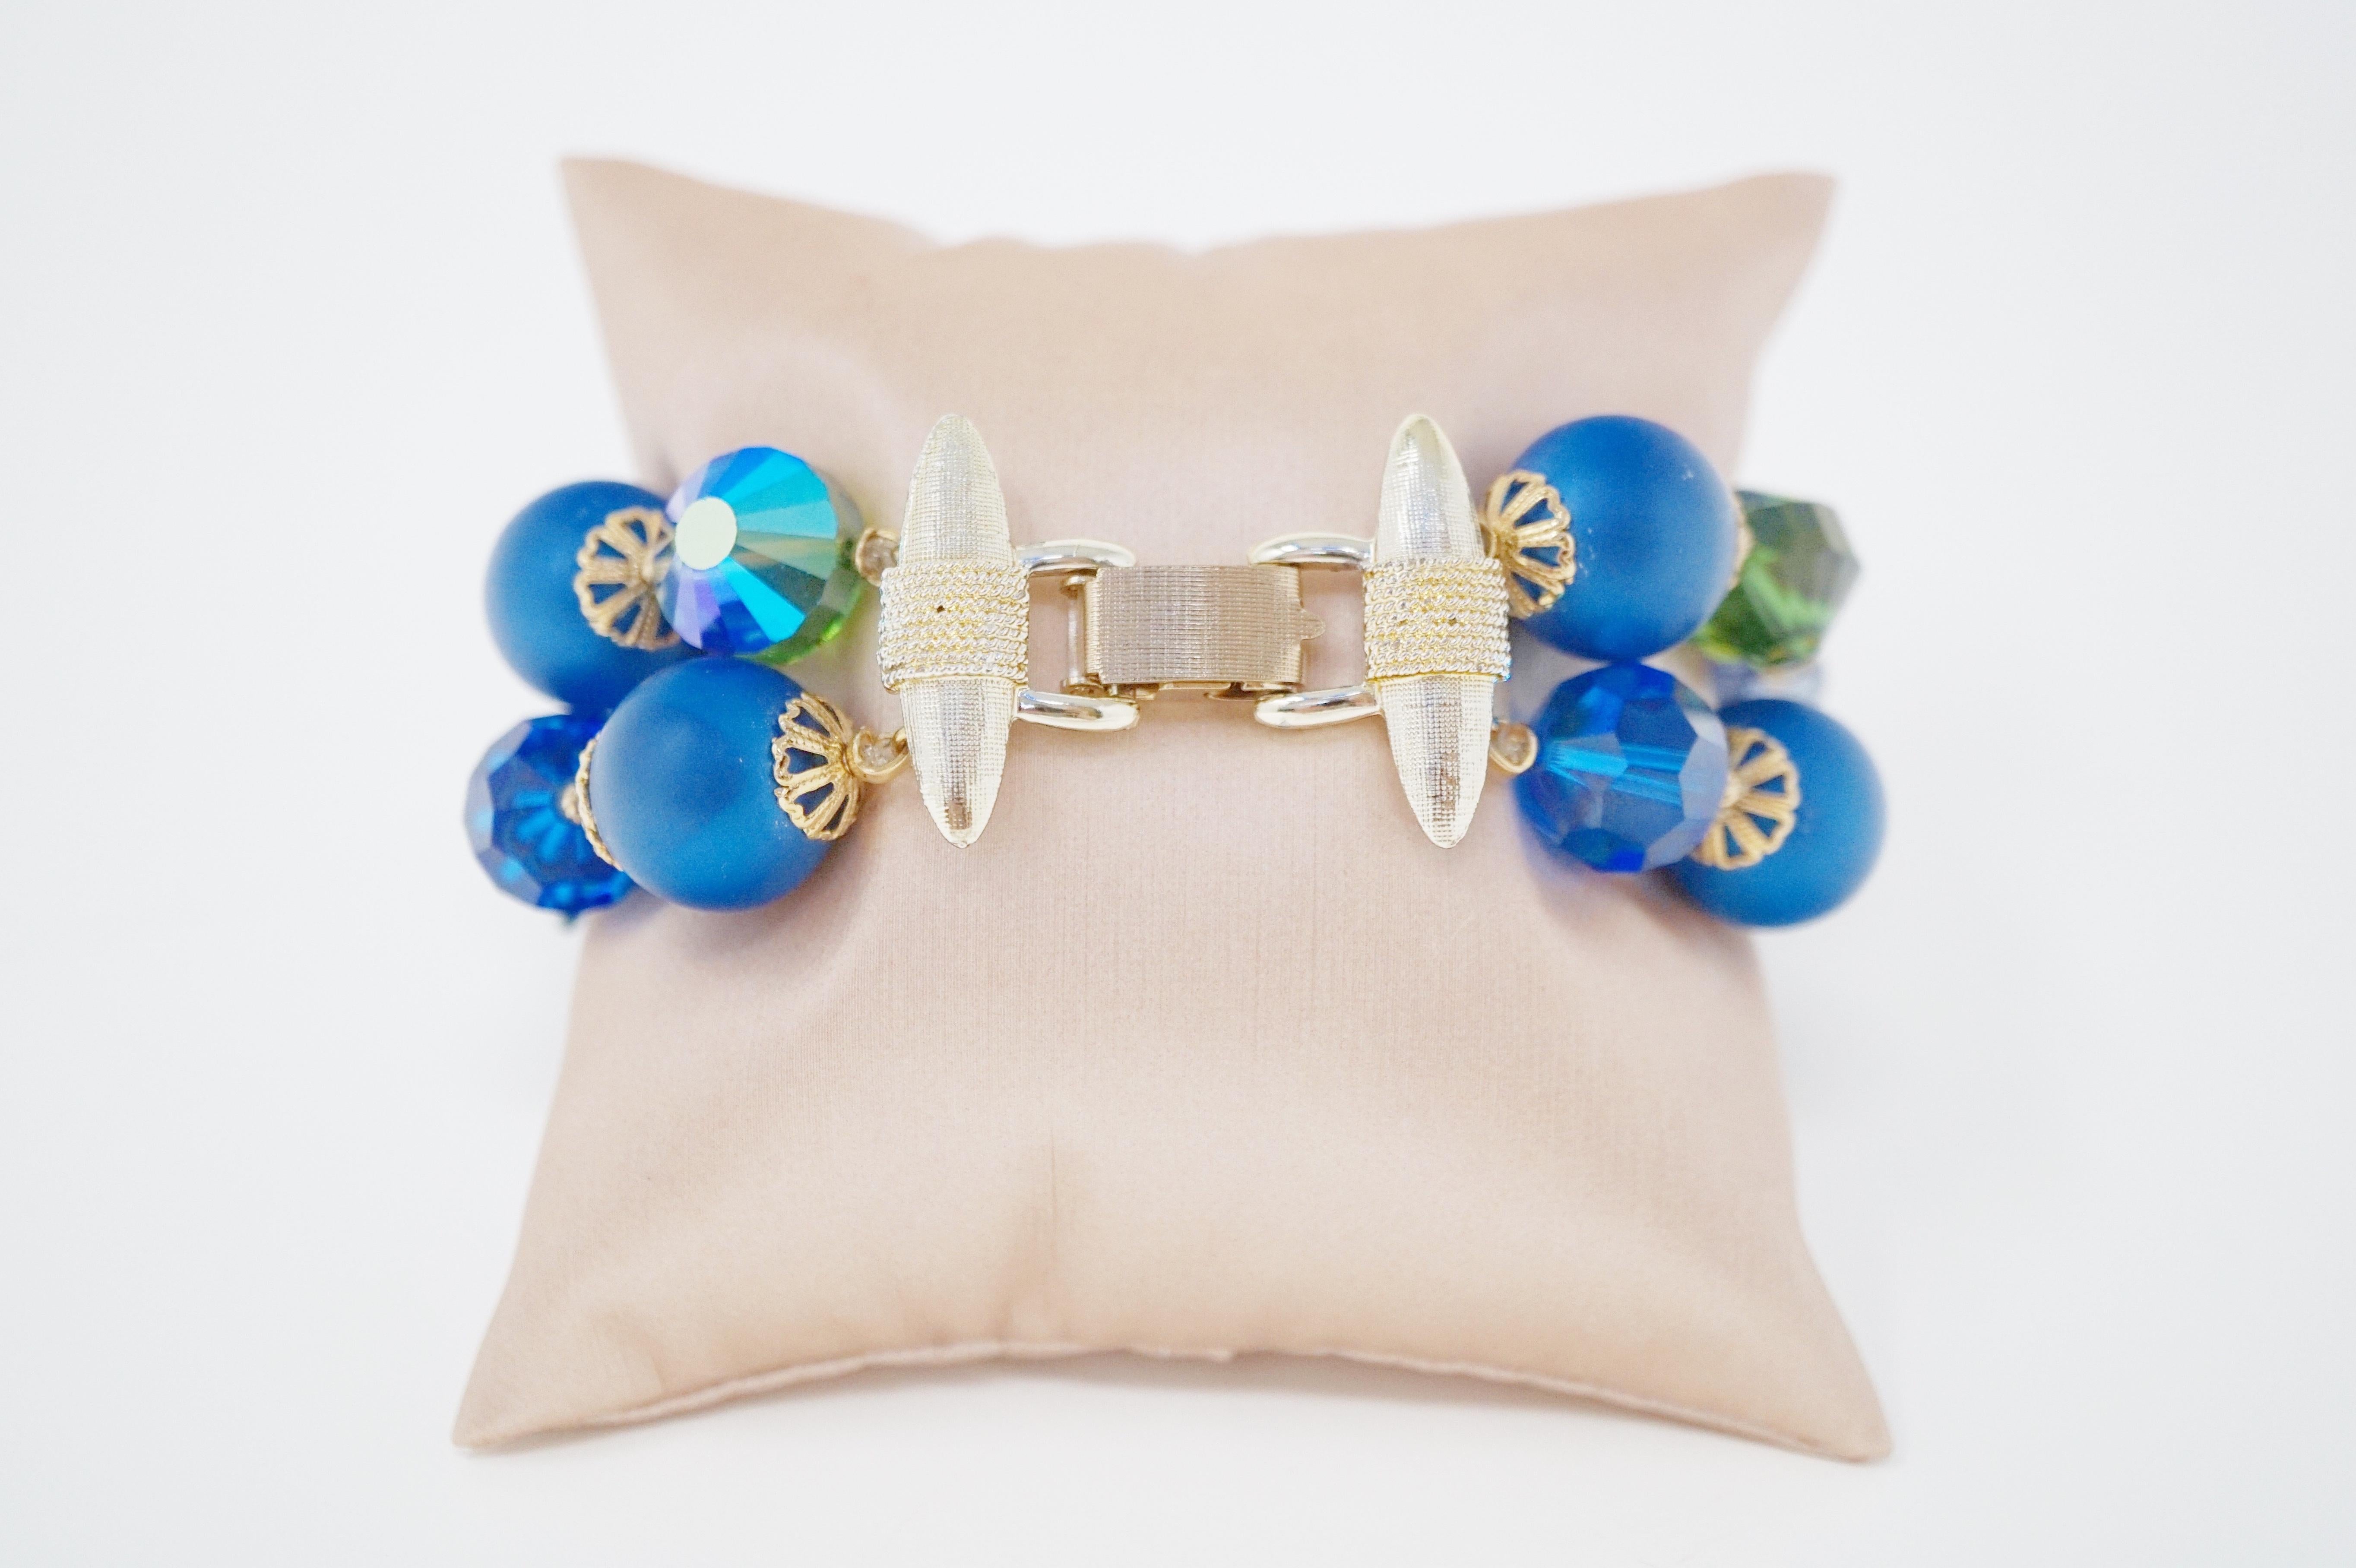 Vendome Beaded Bracelet with Aurora Borealis Crystals, circa 1950, Signed For Sale 1